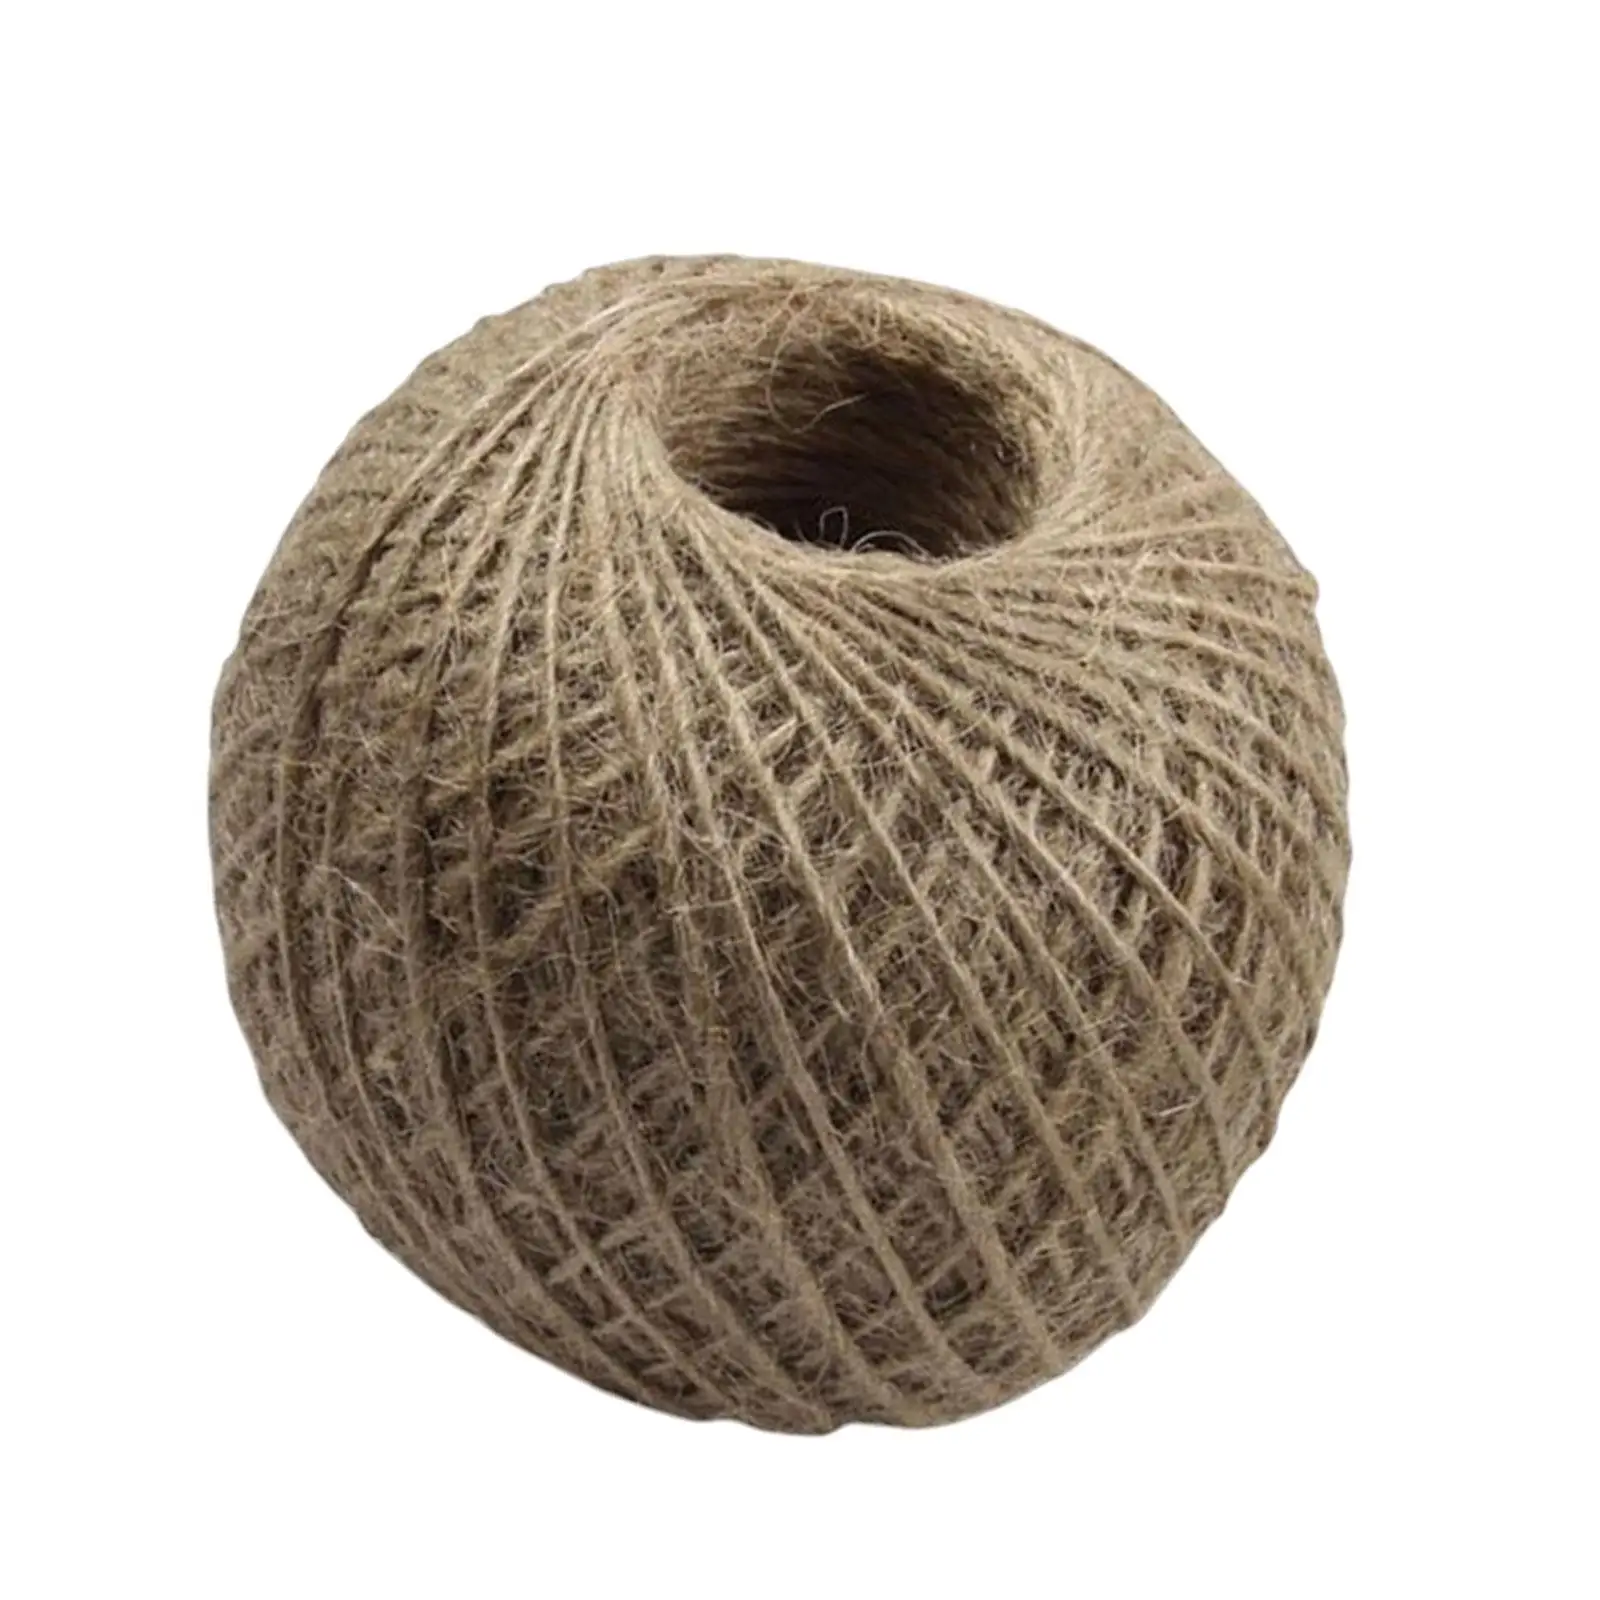 Twisted Cord Hand Woven Weaving Rope Elegant Looking 2mm 80M Hemp Rope for Gift Packaging Gardening Pet Toys Macrame DIY Crafts